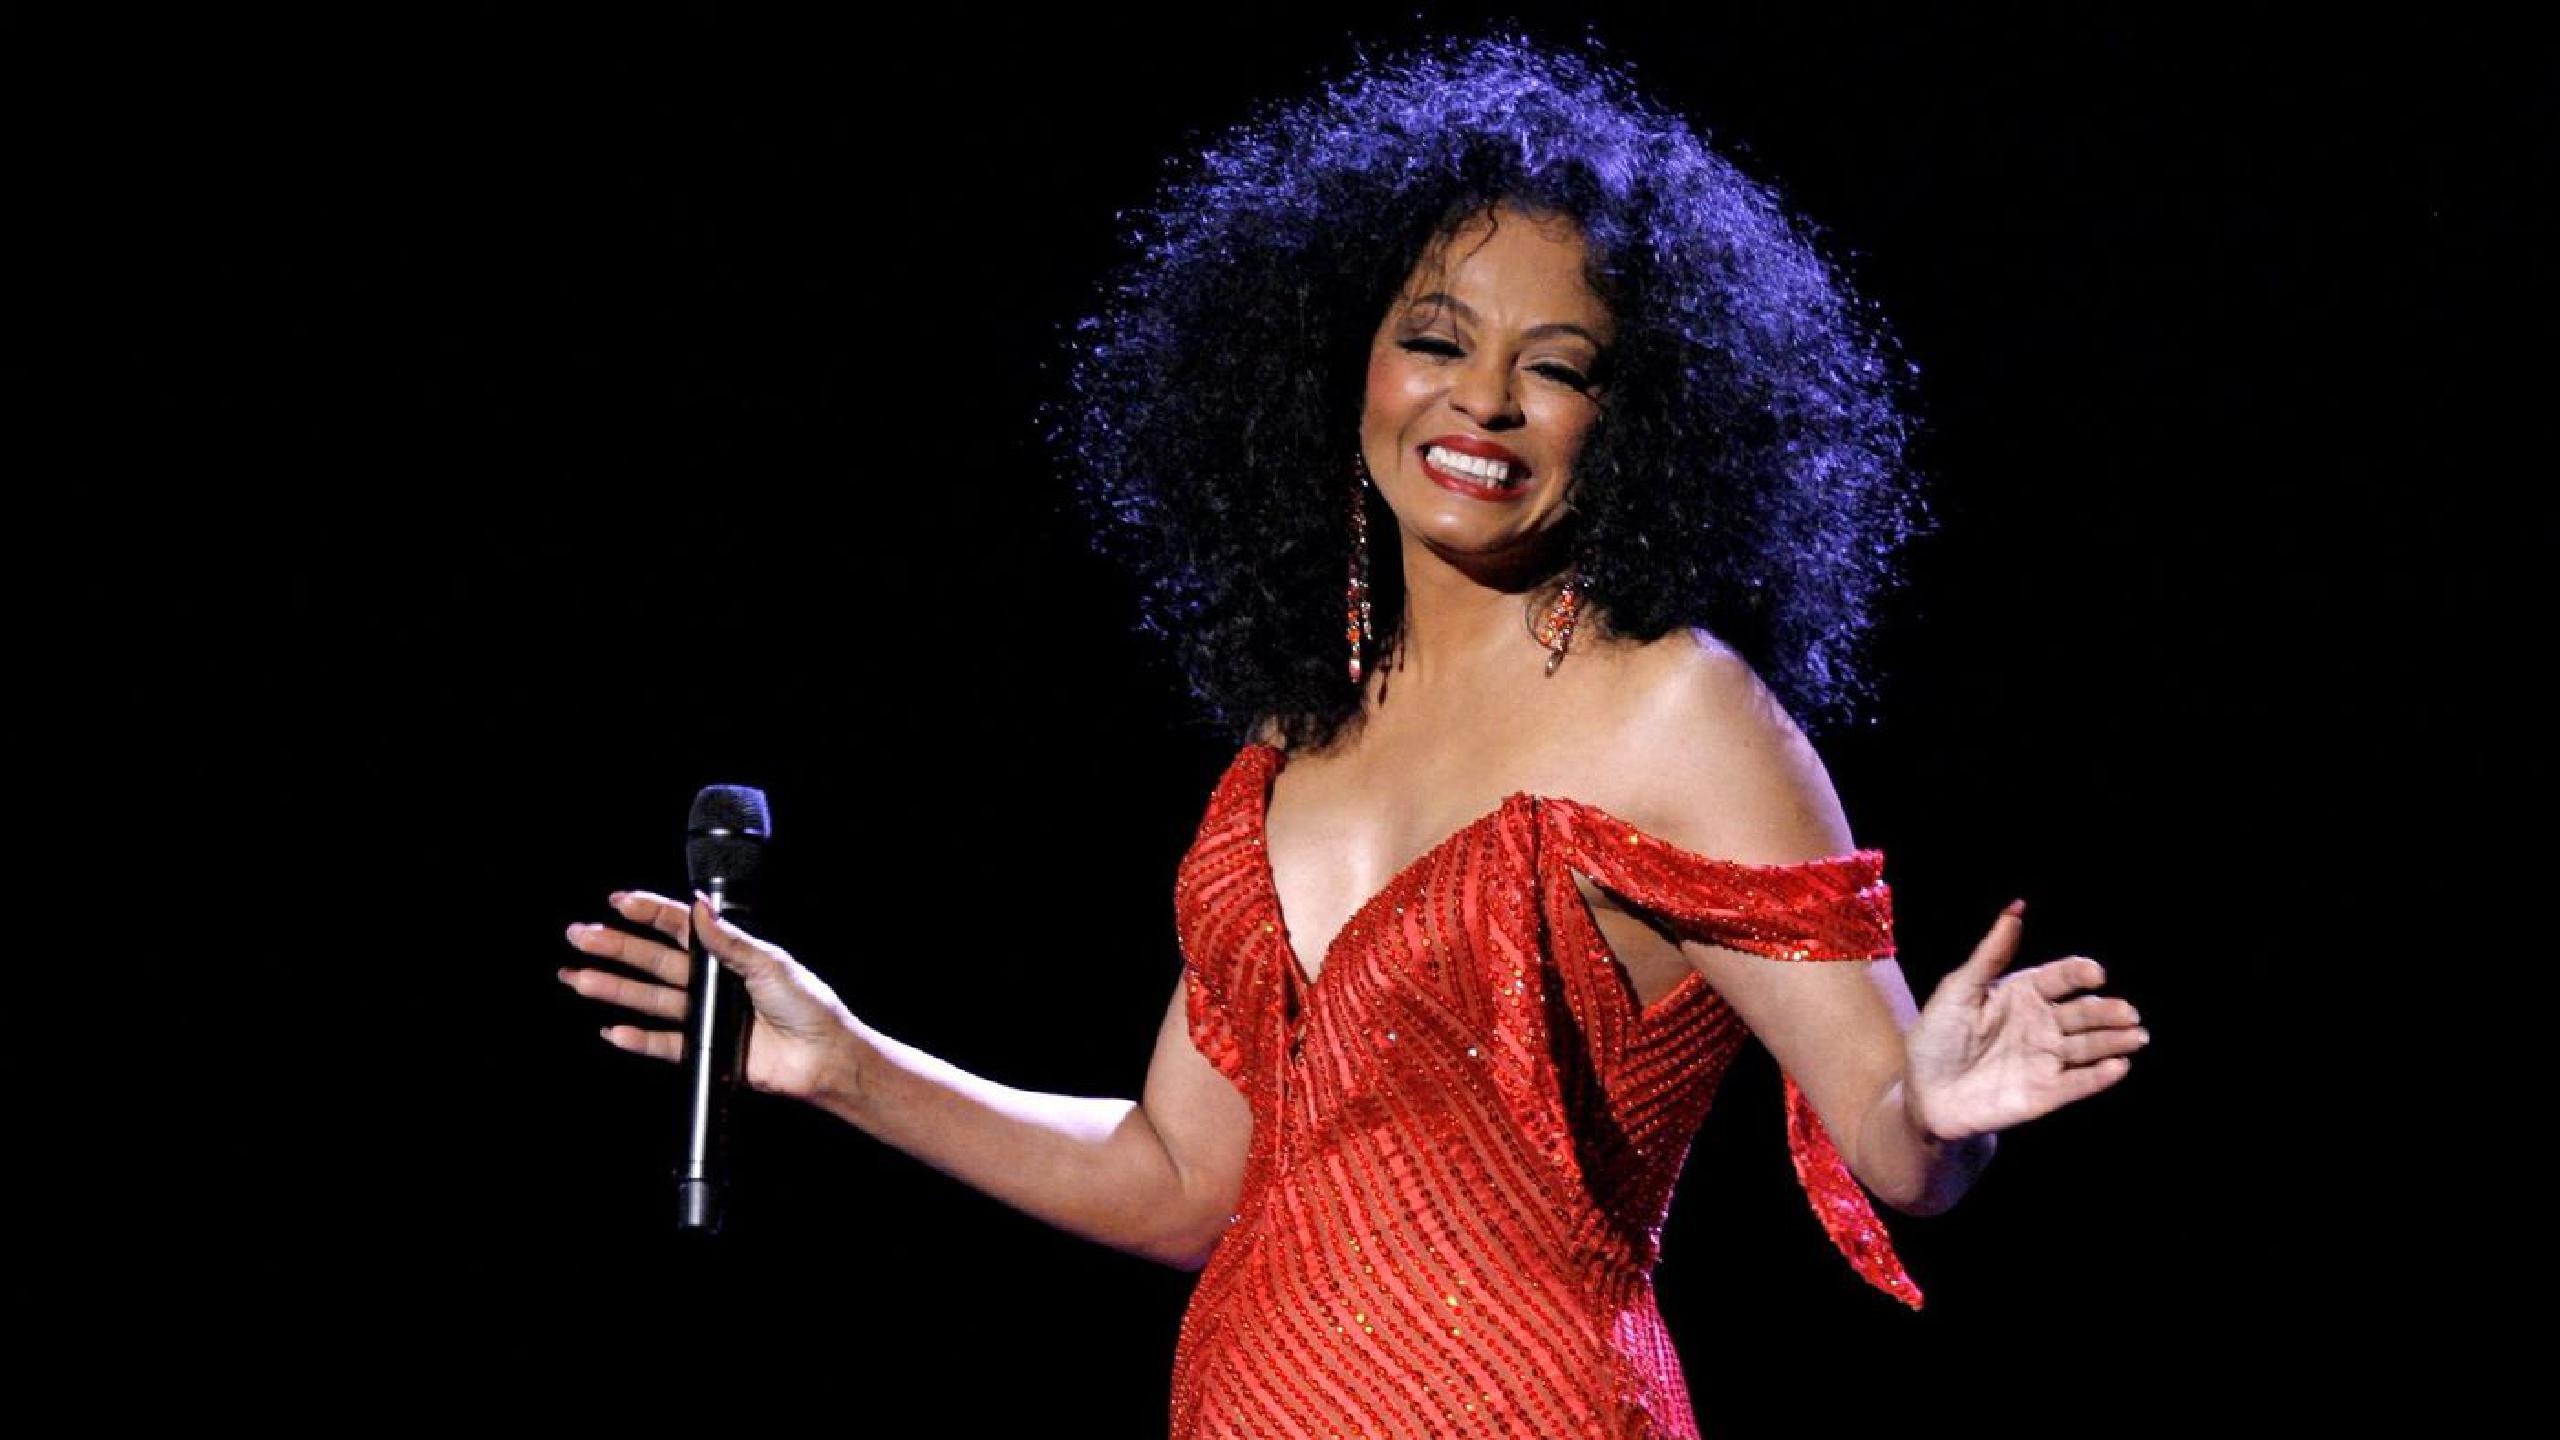 Diana Ross Announces ‘Music Legacy’ North American Tour